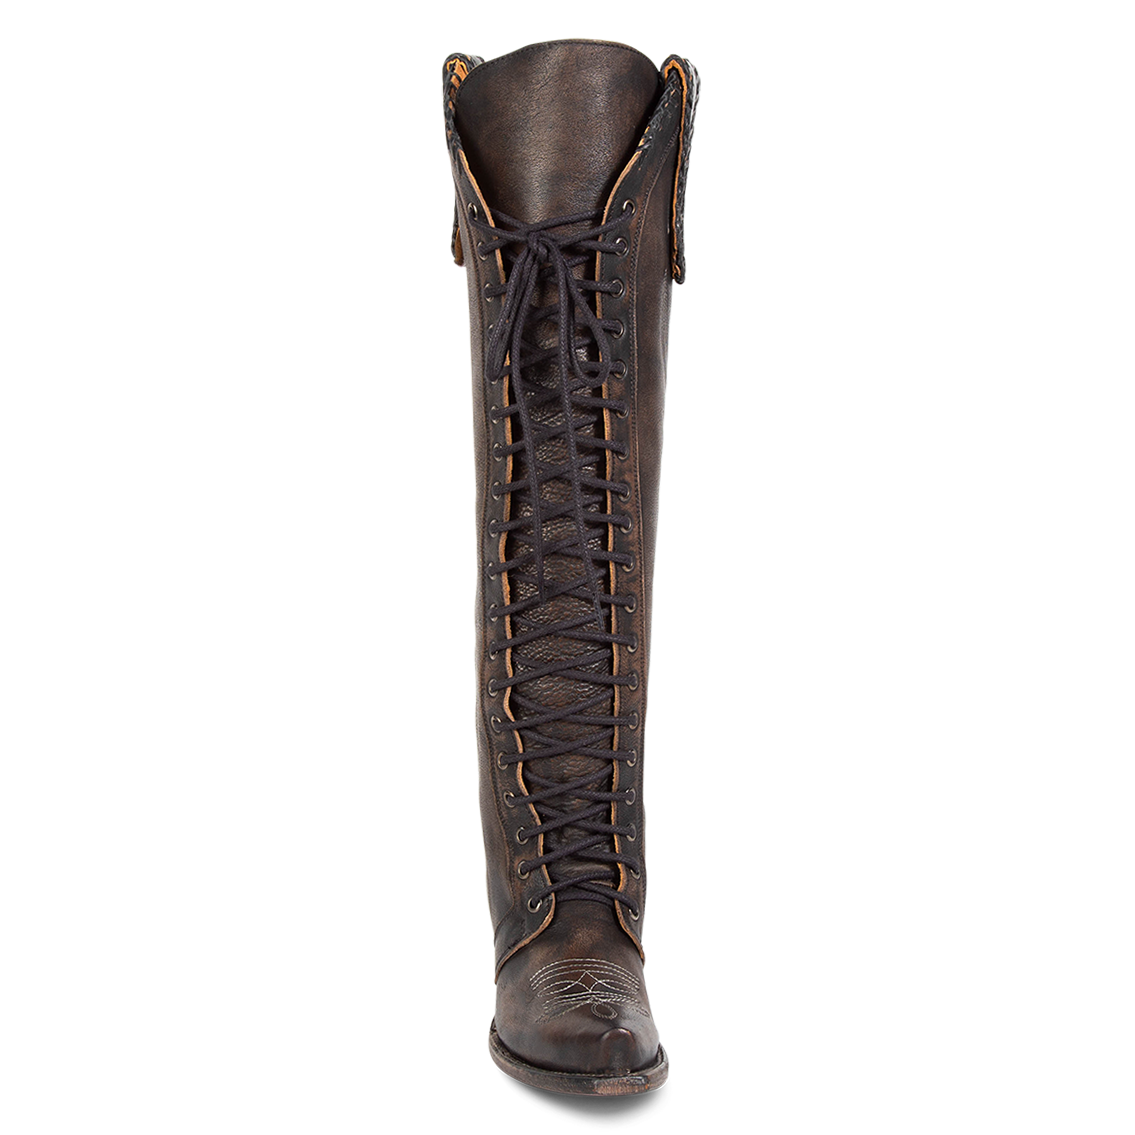 Front view showing tall lace up shaft, woven leather accents, and contrasting stitch detailing on FREEBIRD women's Wilder black boot